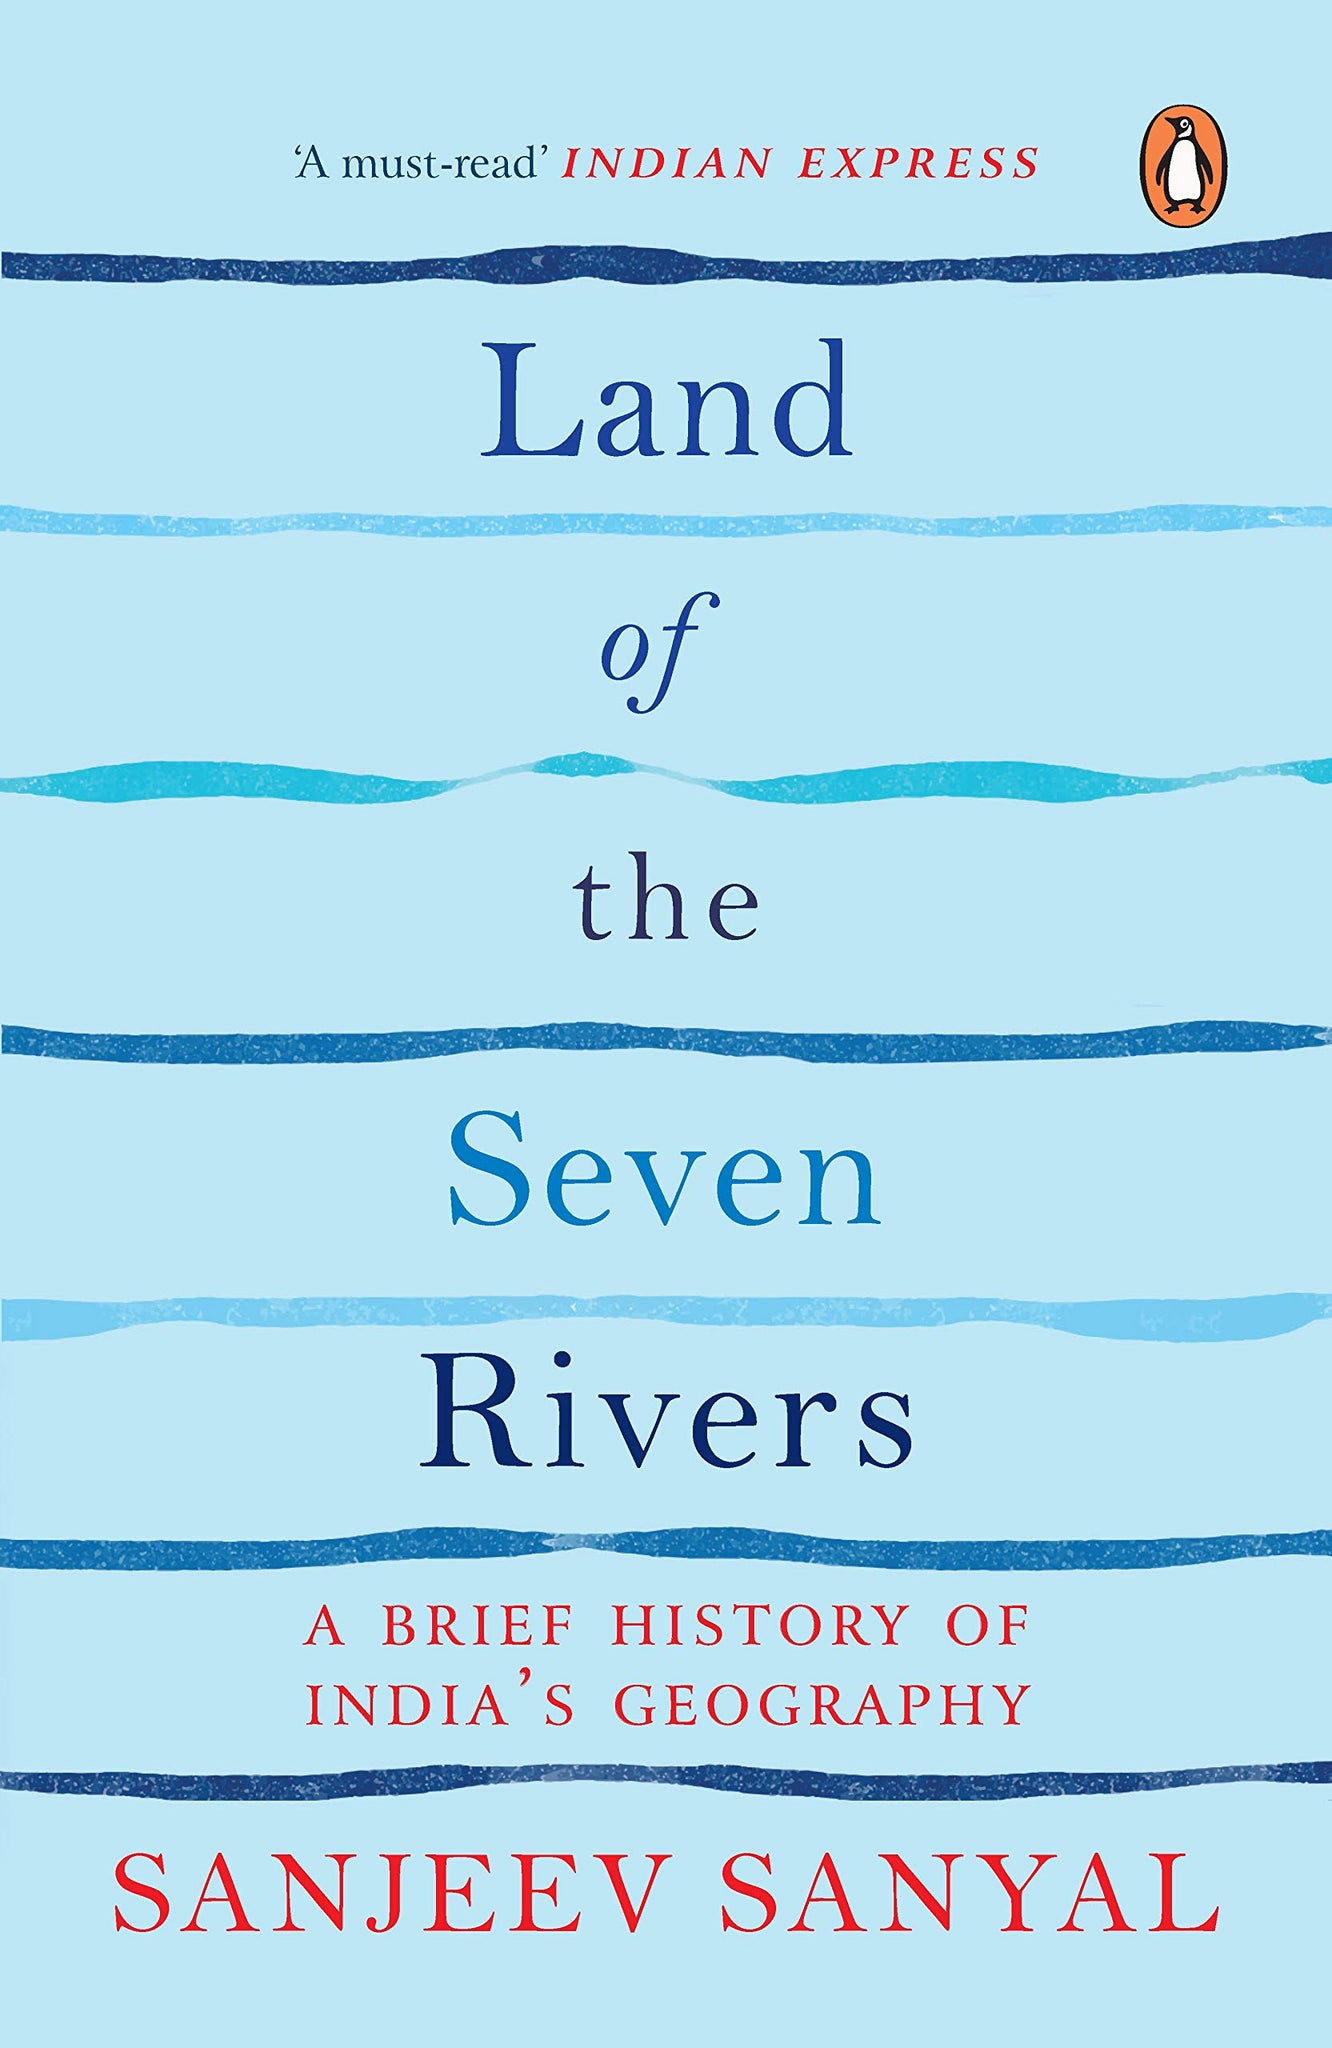 Land of the Seven Rivers: A Brief History of India's Geography - Paperback